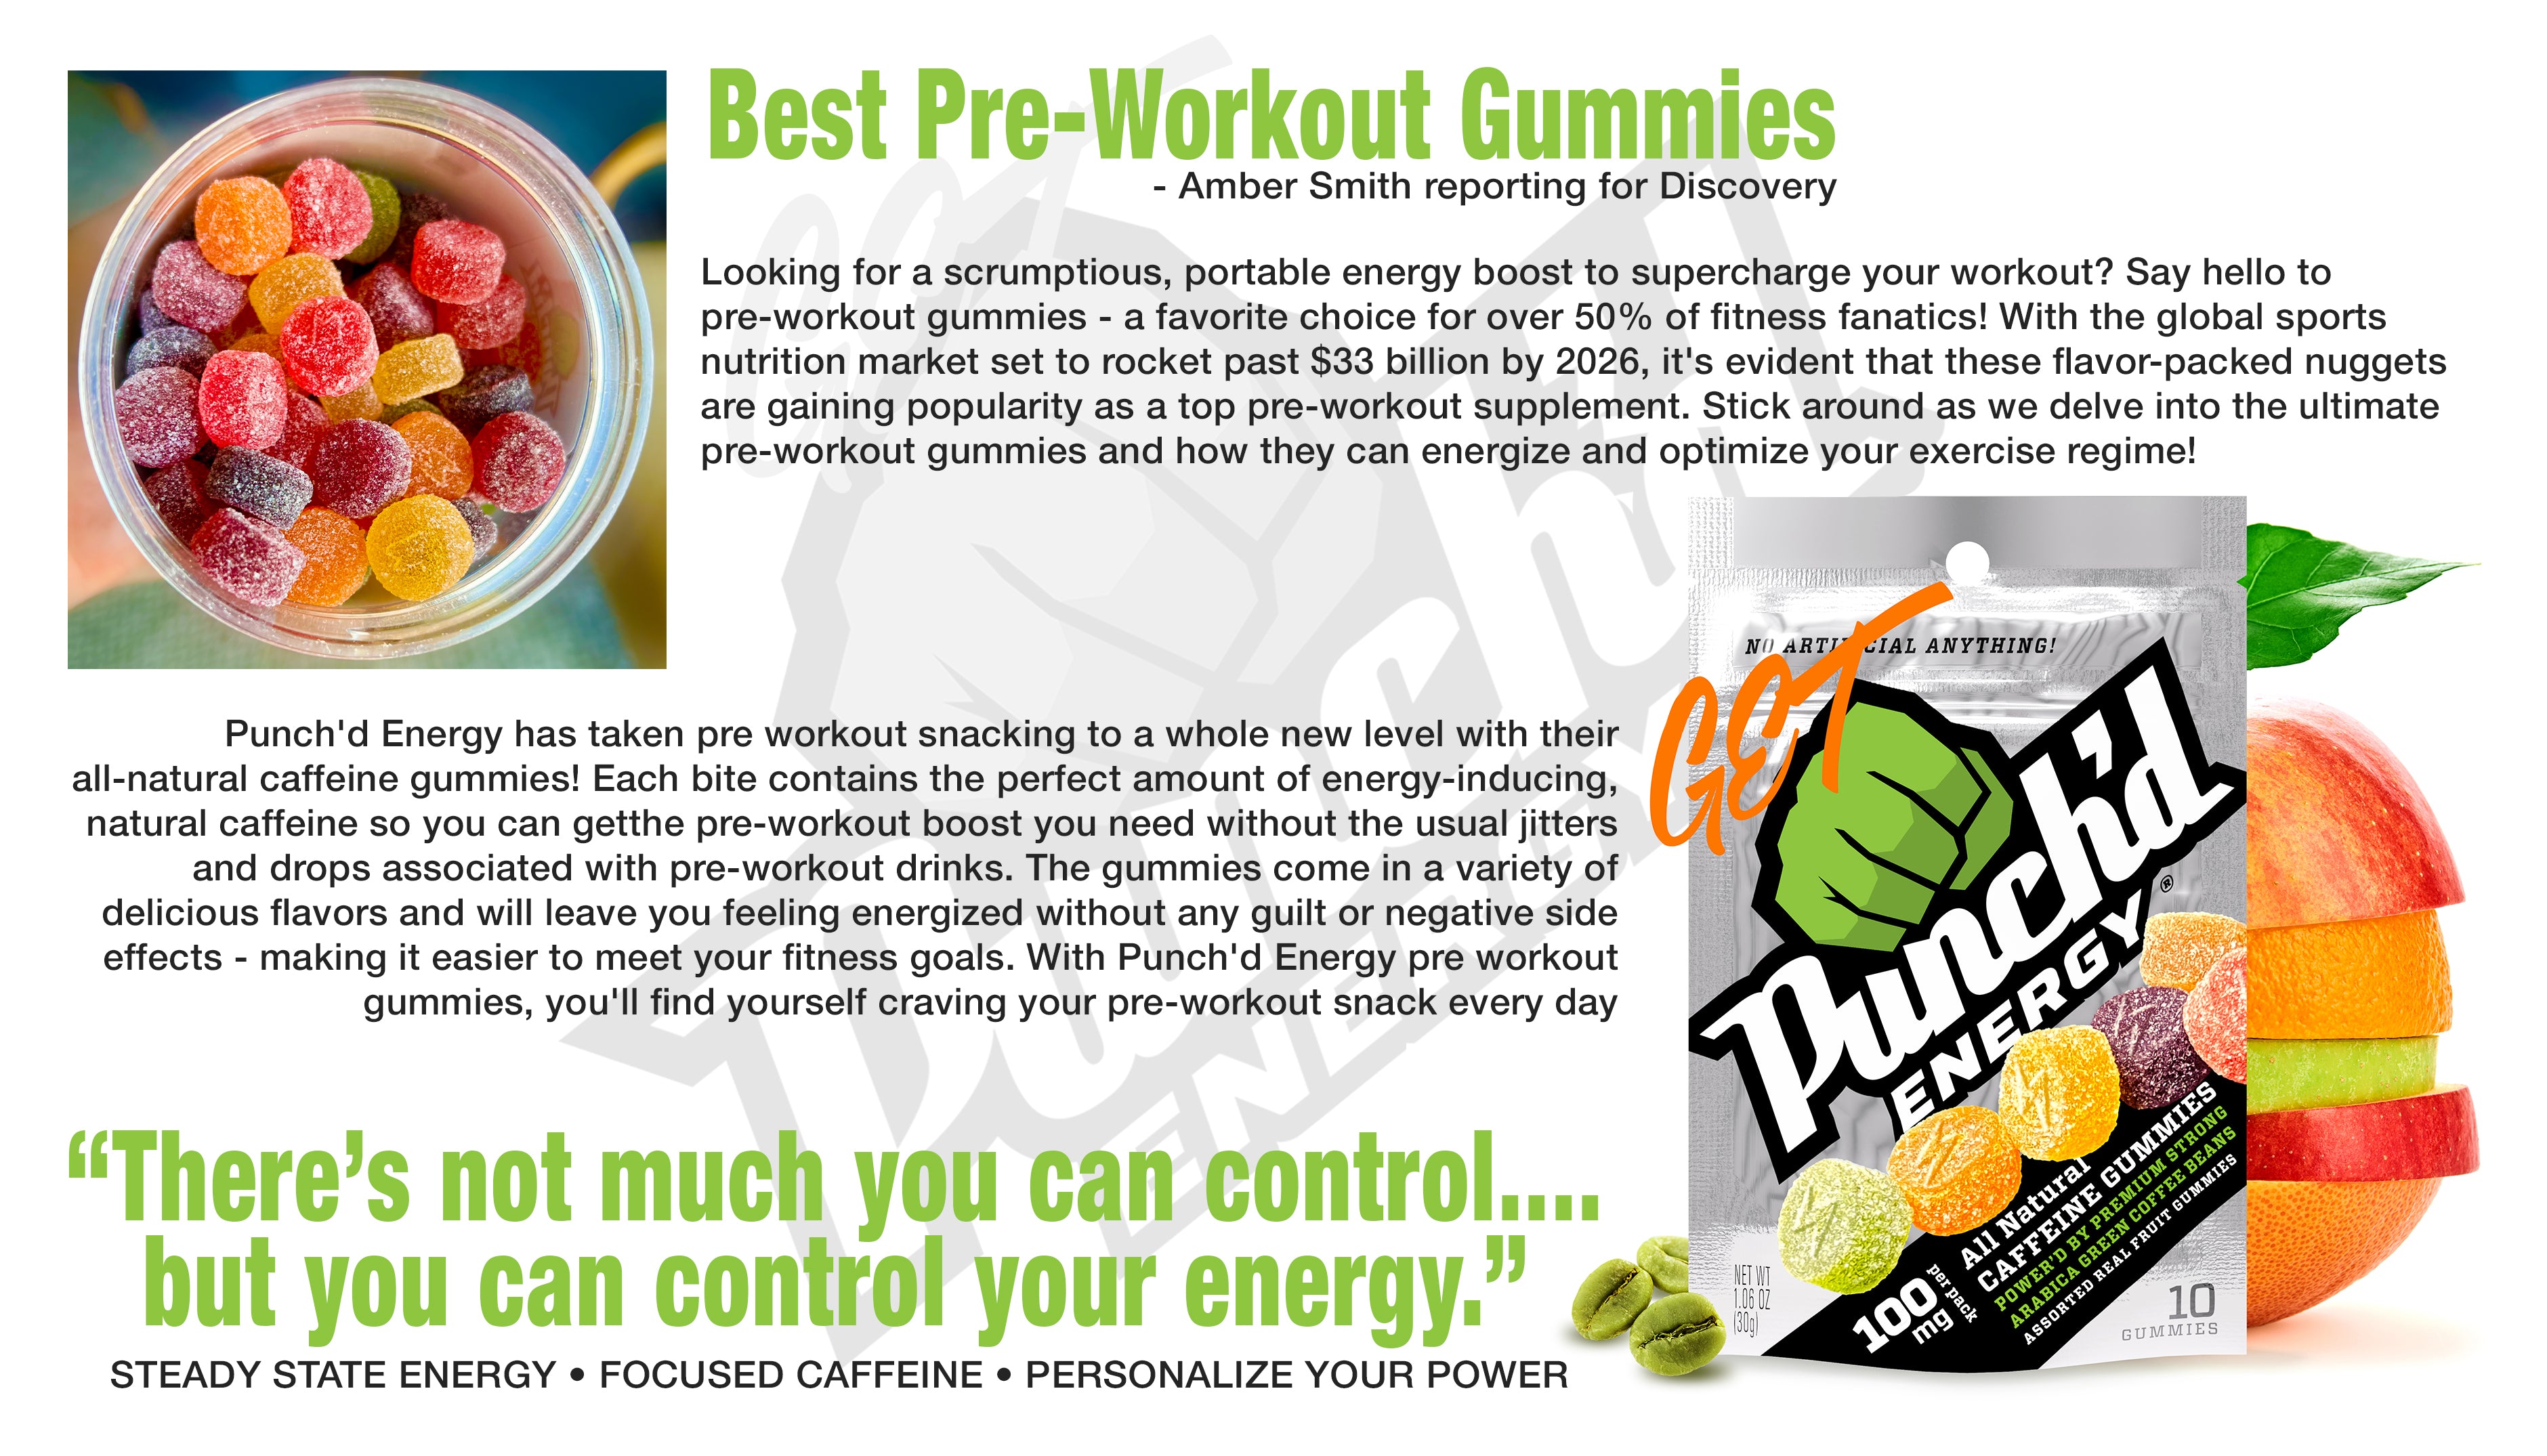 Best Pre-Workout Gummies - Control Your Energy